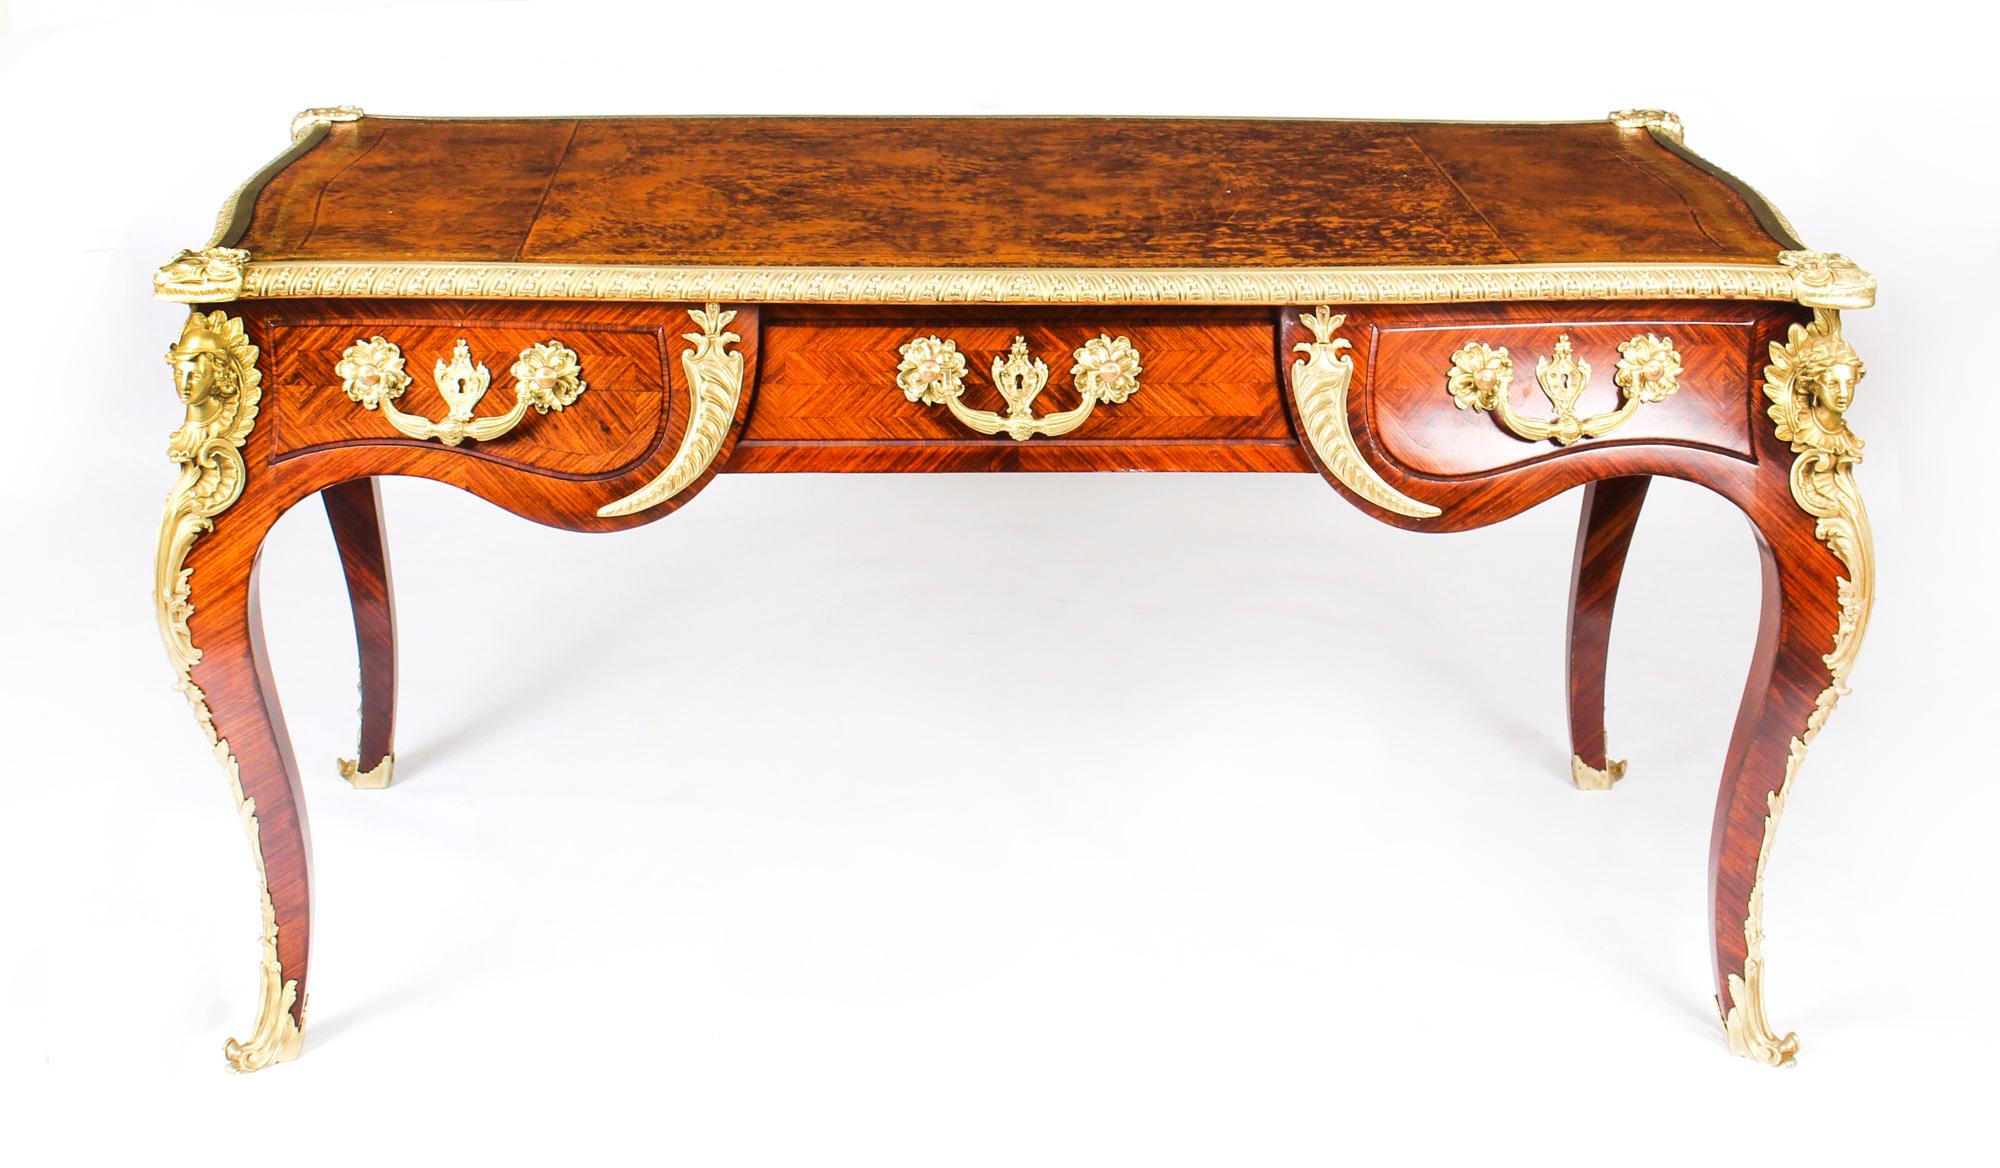 This is a beautiful and rare antique ormolu mounted French  bureau plat, circa 1860 in date.

It has highly decorative ormolu mounts and the shaped rectangular top has a decorative ormolu border and is inset with a superb gilt-tooled tan leather